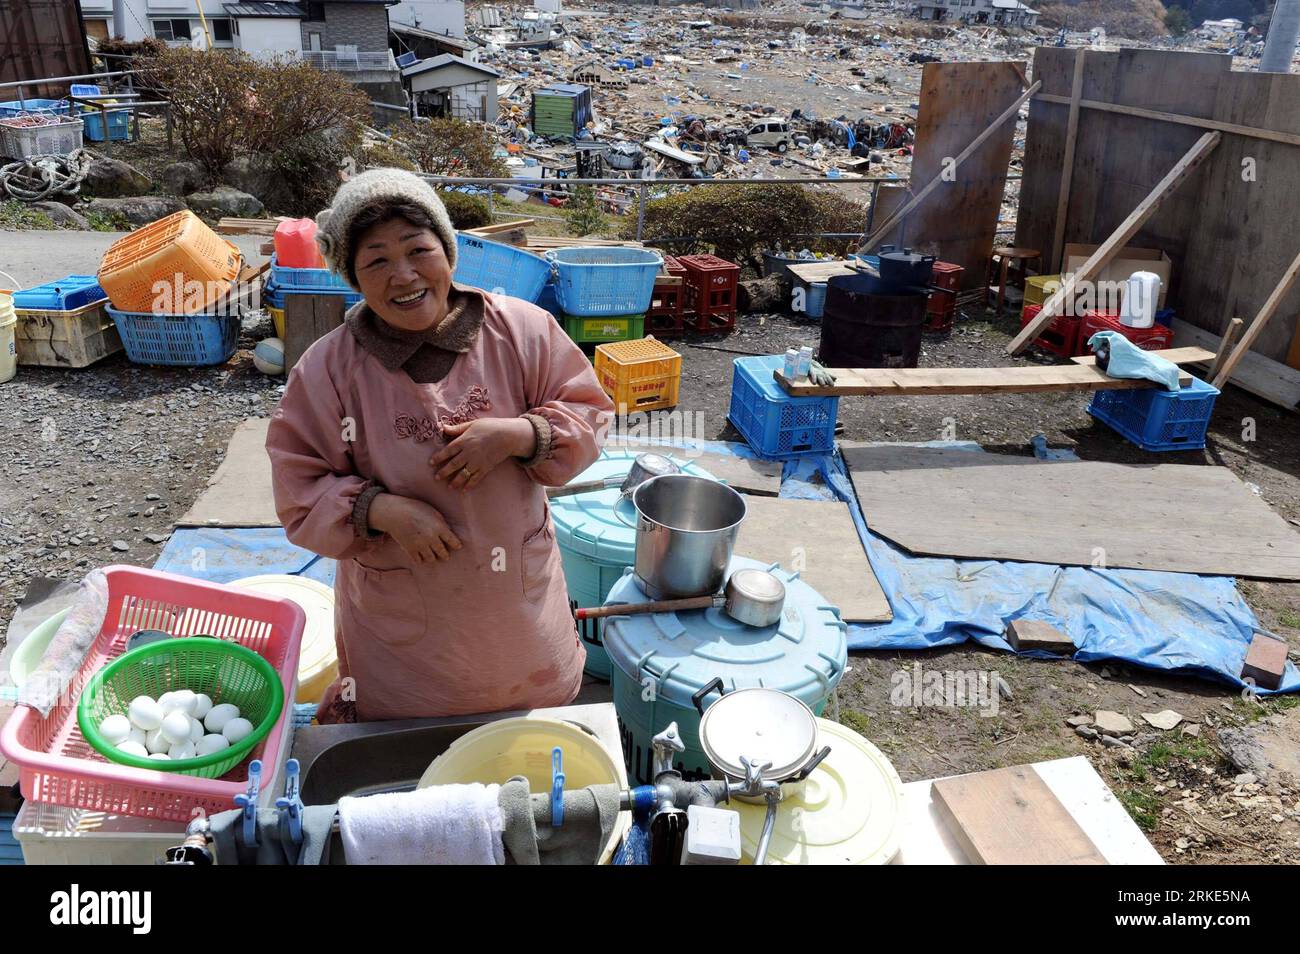 Bildnummer: 55055320  Datum: 23.03.2011  Copyright: imago/Xinhua (110323) -- MIYAGI, March 23, 2011 (Xinhua) -- Tamie Suda, 62, cooks meal in front of her house in Oshikacho of Miyagi prefecture, Japan, March 23, 2011. The Suda family survived from the quake-tsunami, but lost the source of income as the family hotel they run was destroyed. The family members began to rebuild houses although the water, gas and power supplies were cut off at present. (Xinhua/Song Zhenping) (lyi) JAPAN-MIYAGI-DAILY LIFE PUBLICATIONxNOTxINxCHN Gesellschaft Japan Naturkatastrophe Erdbeben Tsunami Schäden Alltag Lan Stock Photo